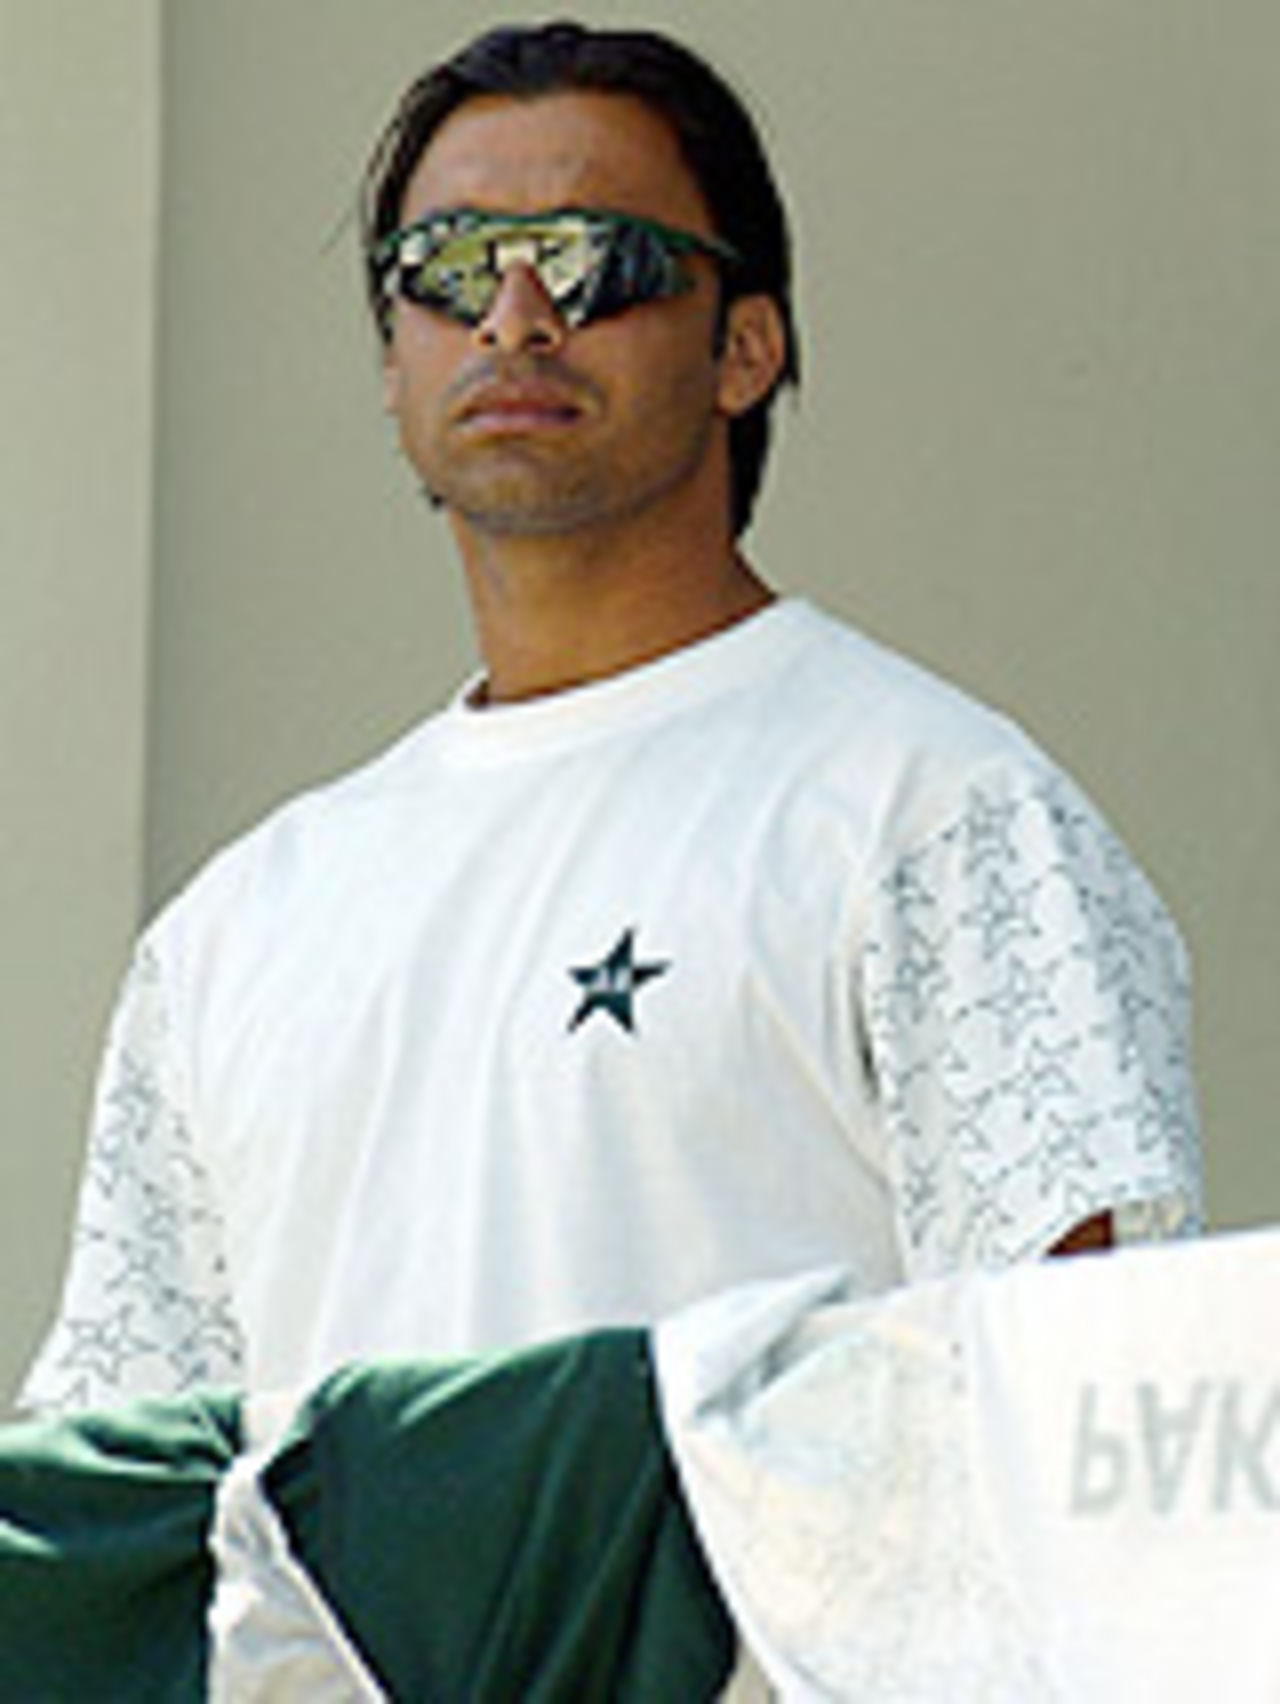 Shoaib Akhtar watches the action from the dressing room after injuring himself, Pakistan v India, 3rd Test, Rawalpindi, 3rd day, April 15, 2004